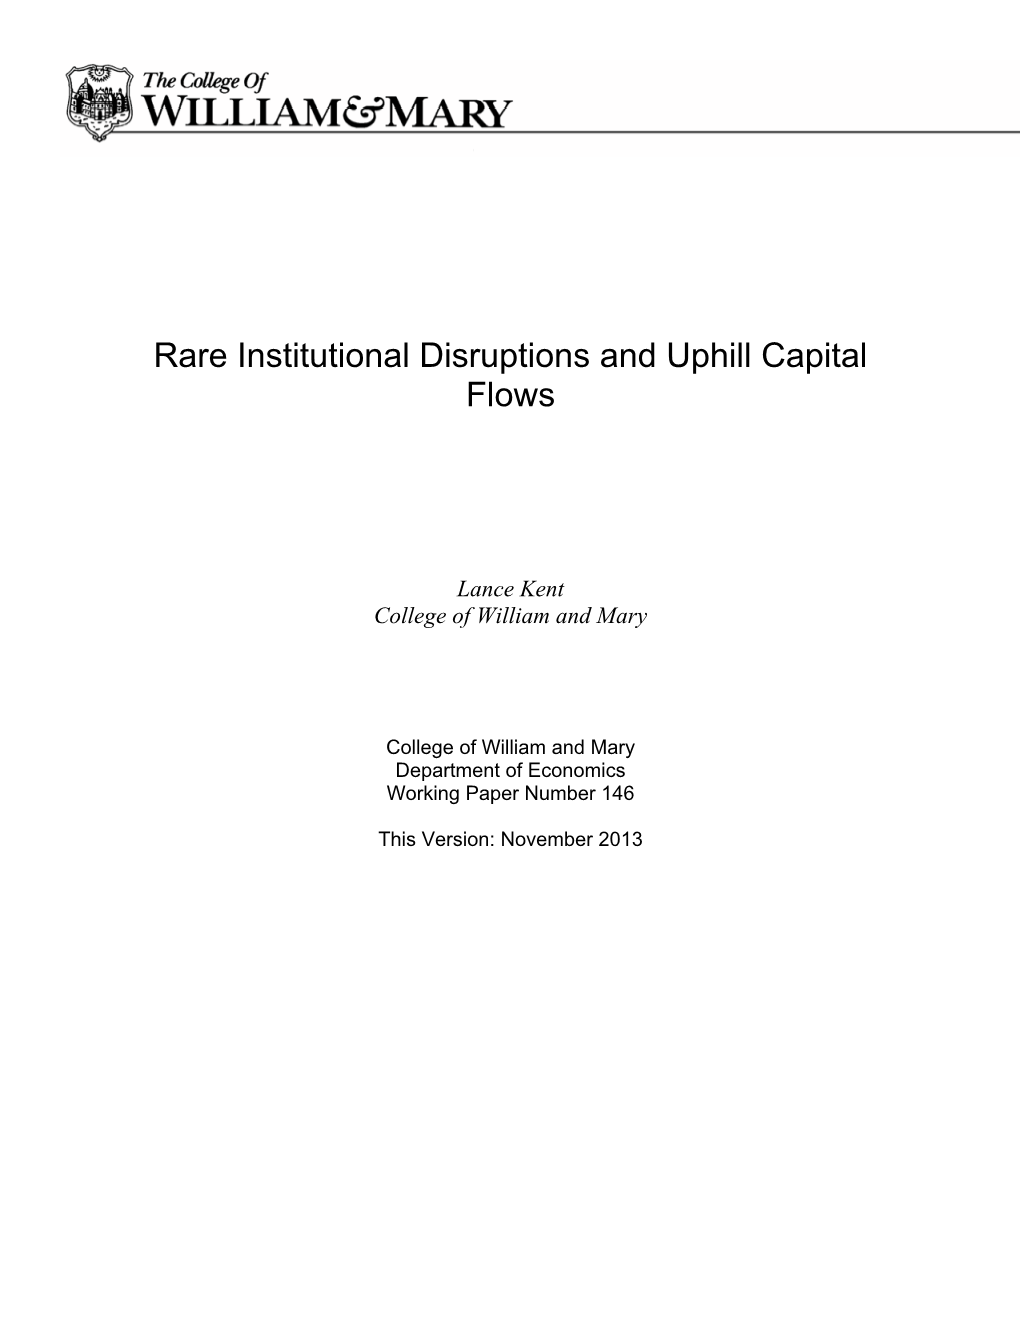 Rare Institutional Disruptions and Uphill Capital Flows